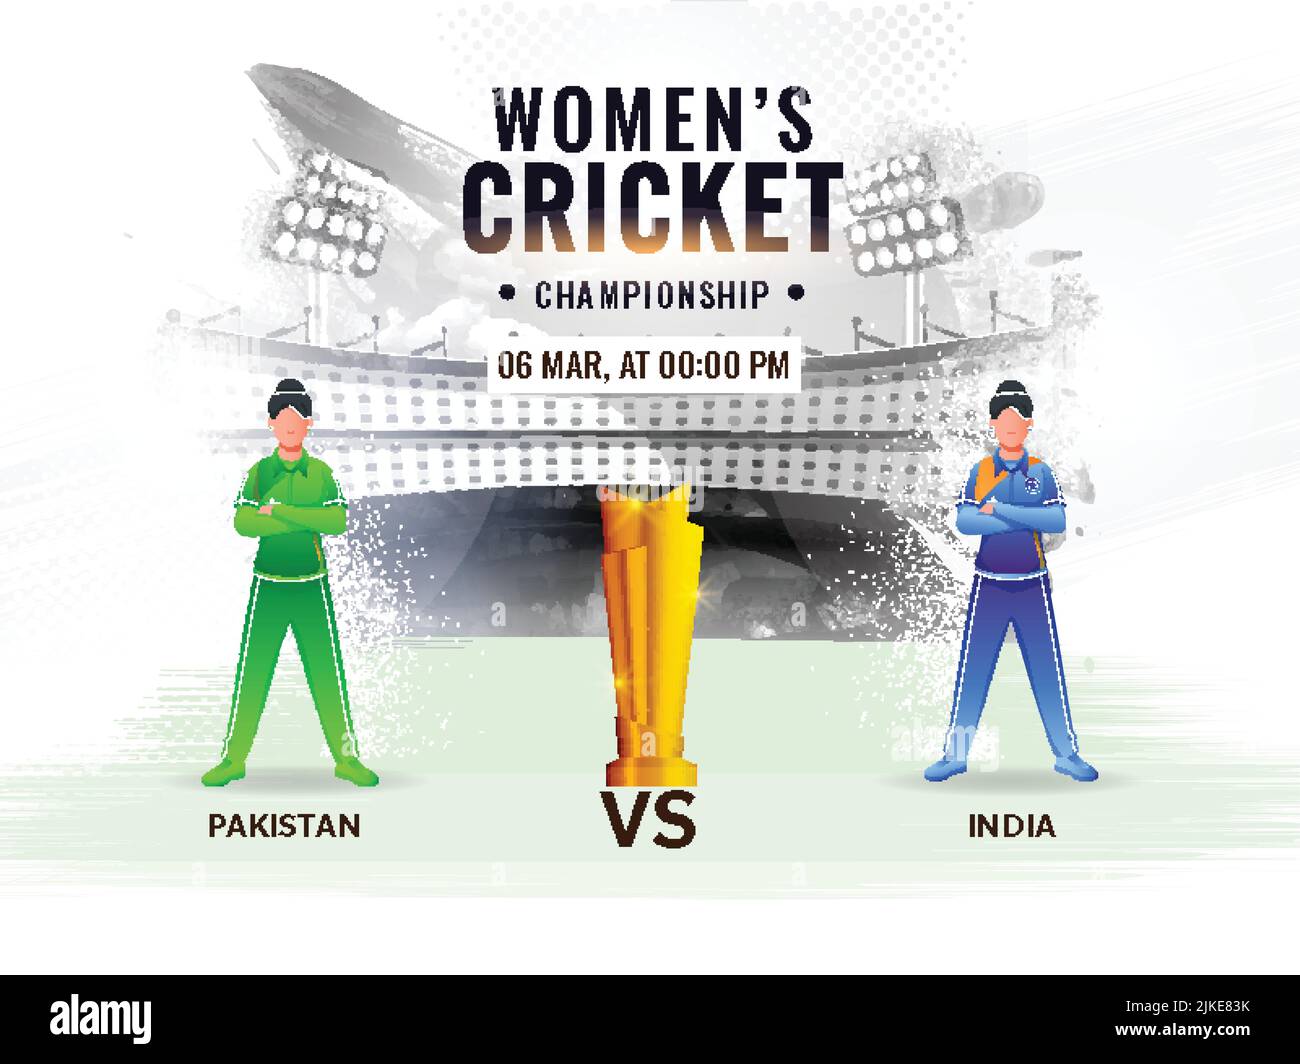 Women's Cricket Match Between Pakistan VS India With Faceless Players And Golden Trophy Cup On Abstract Grunge Stadium Background. Stock Vector